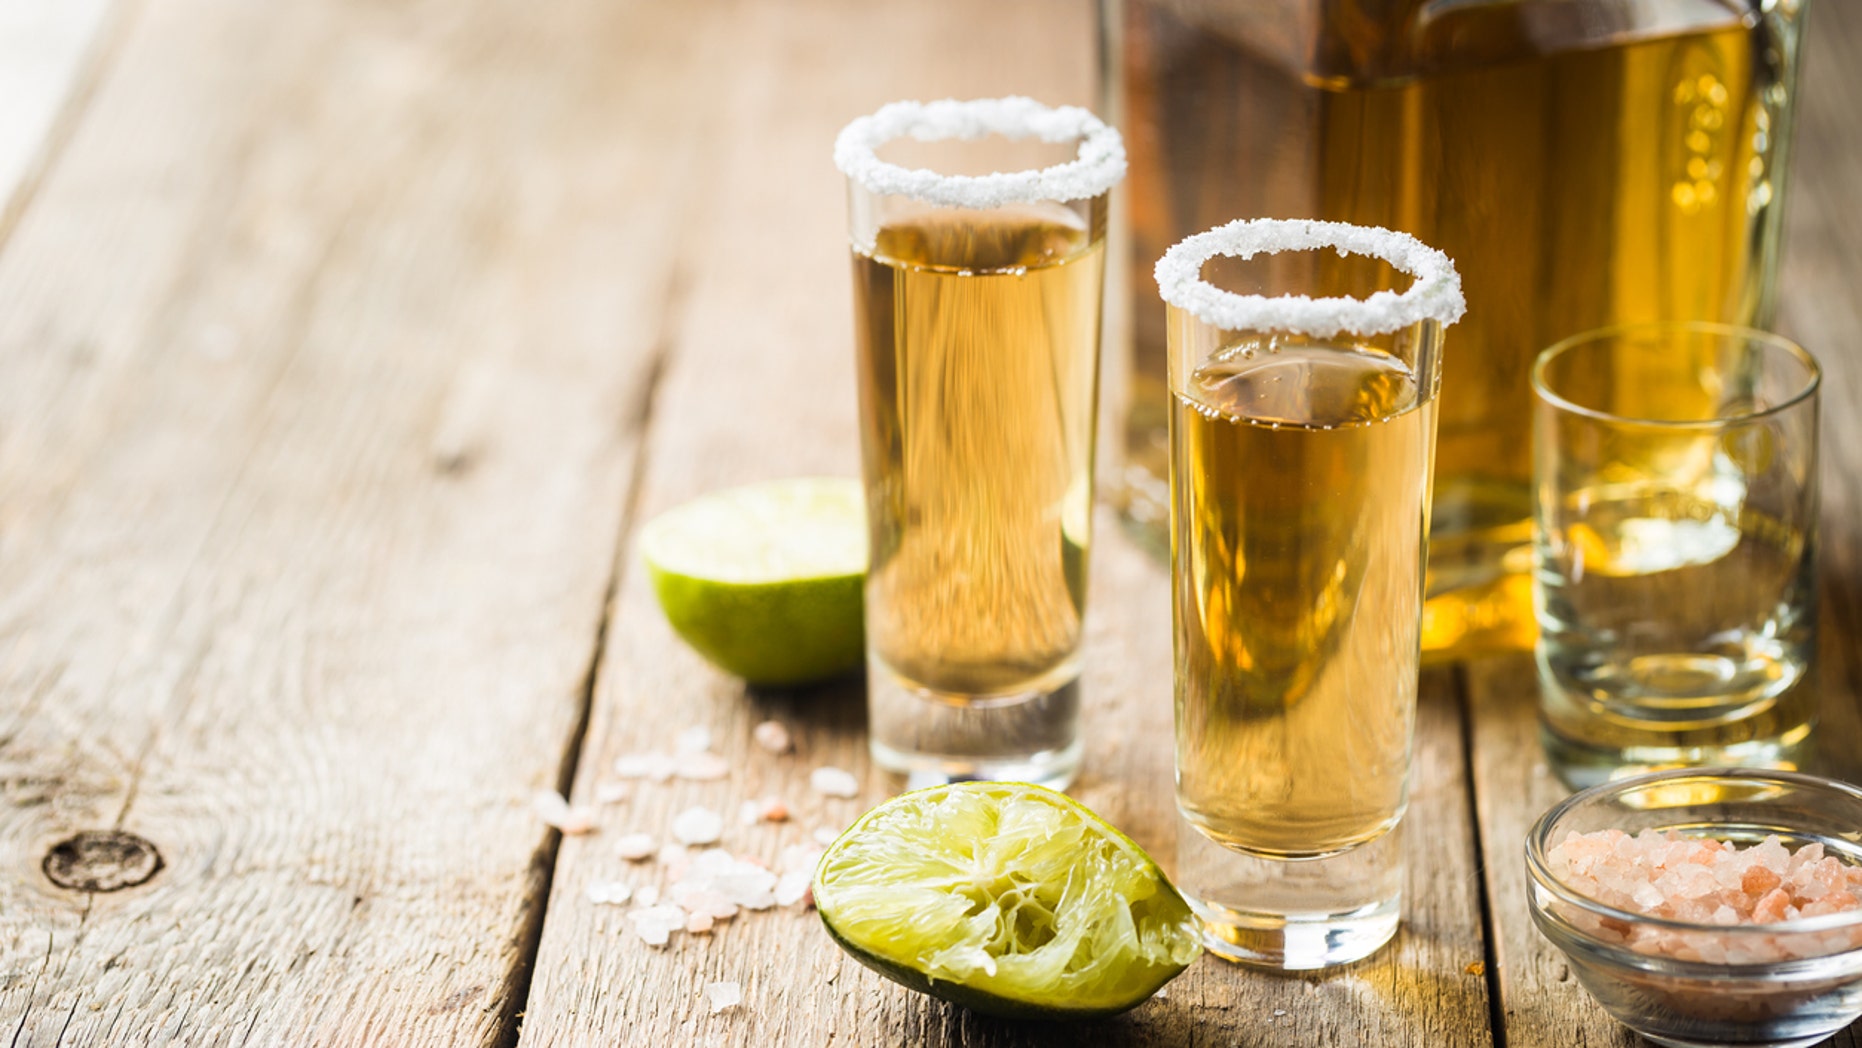 Study claims tequila may help with weight loss, lowering blood sugar levels